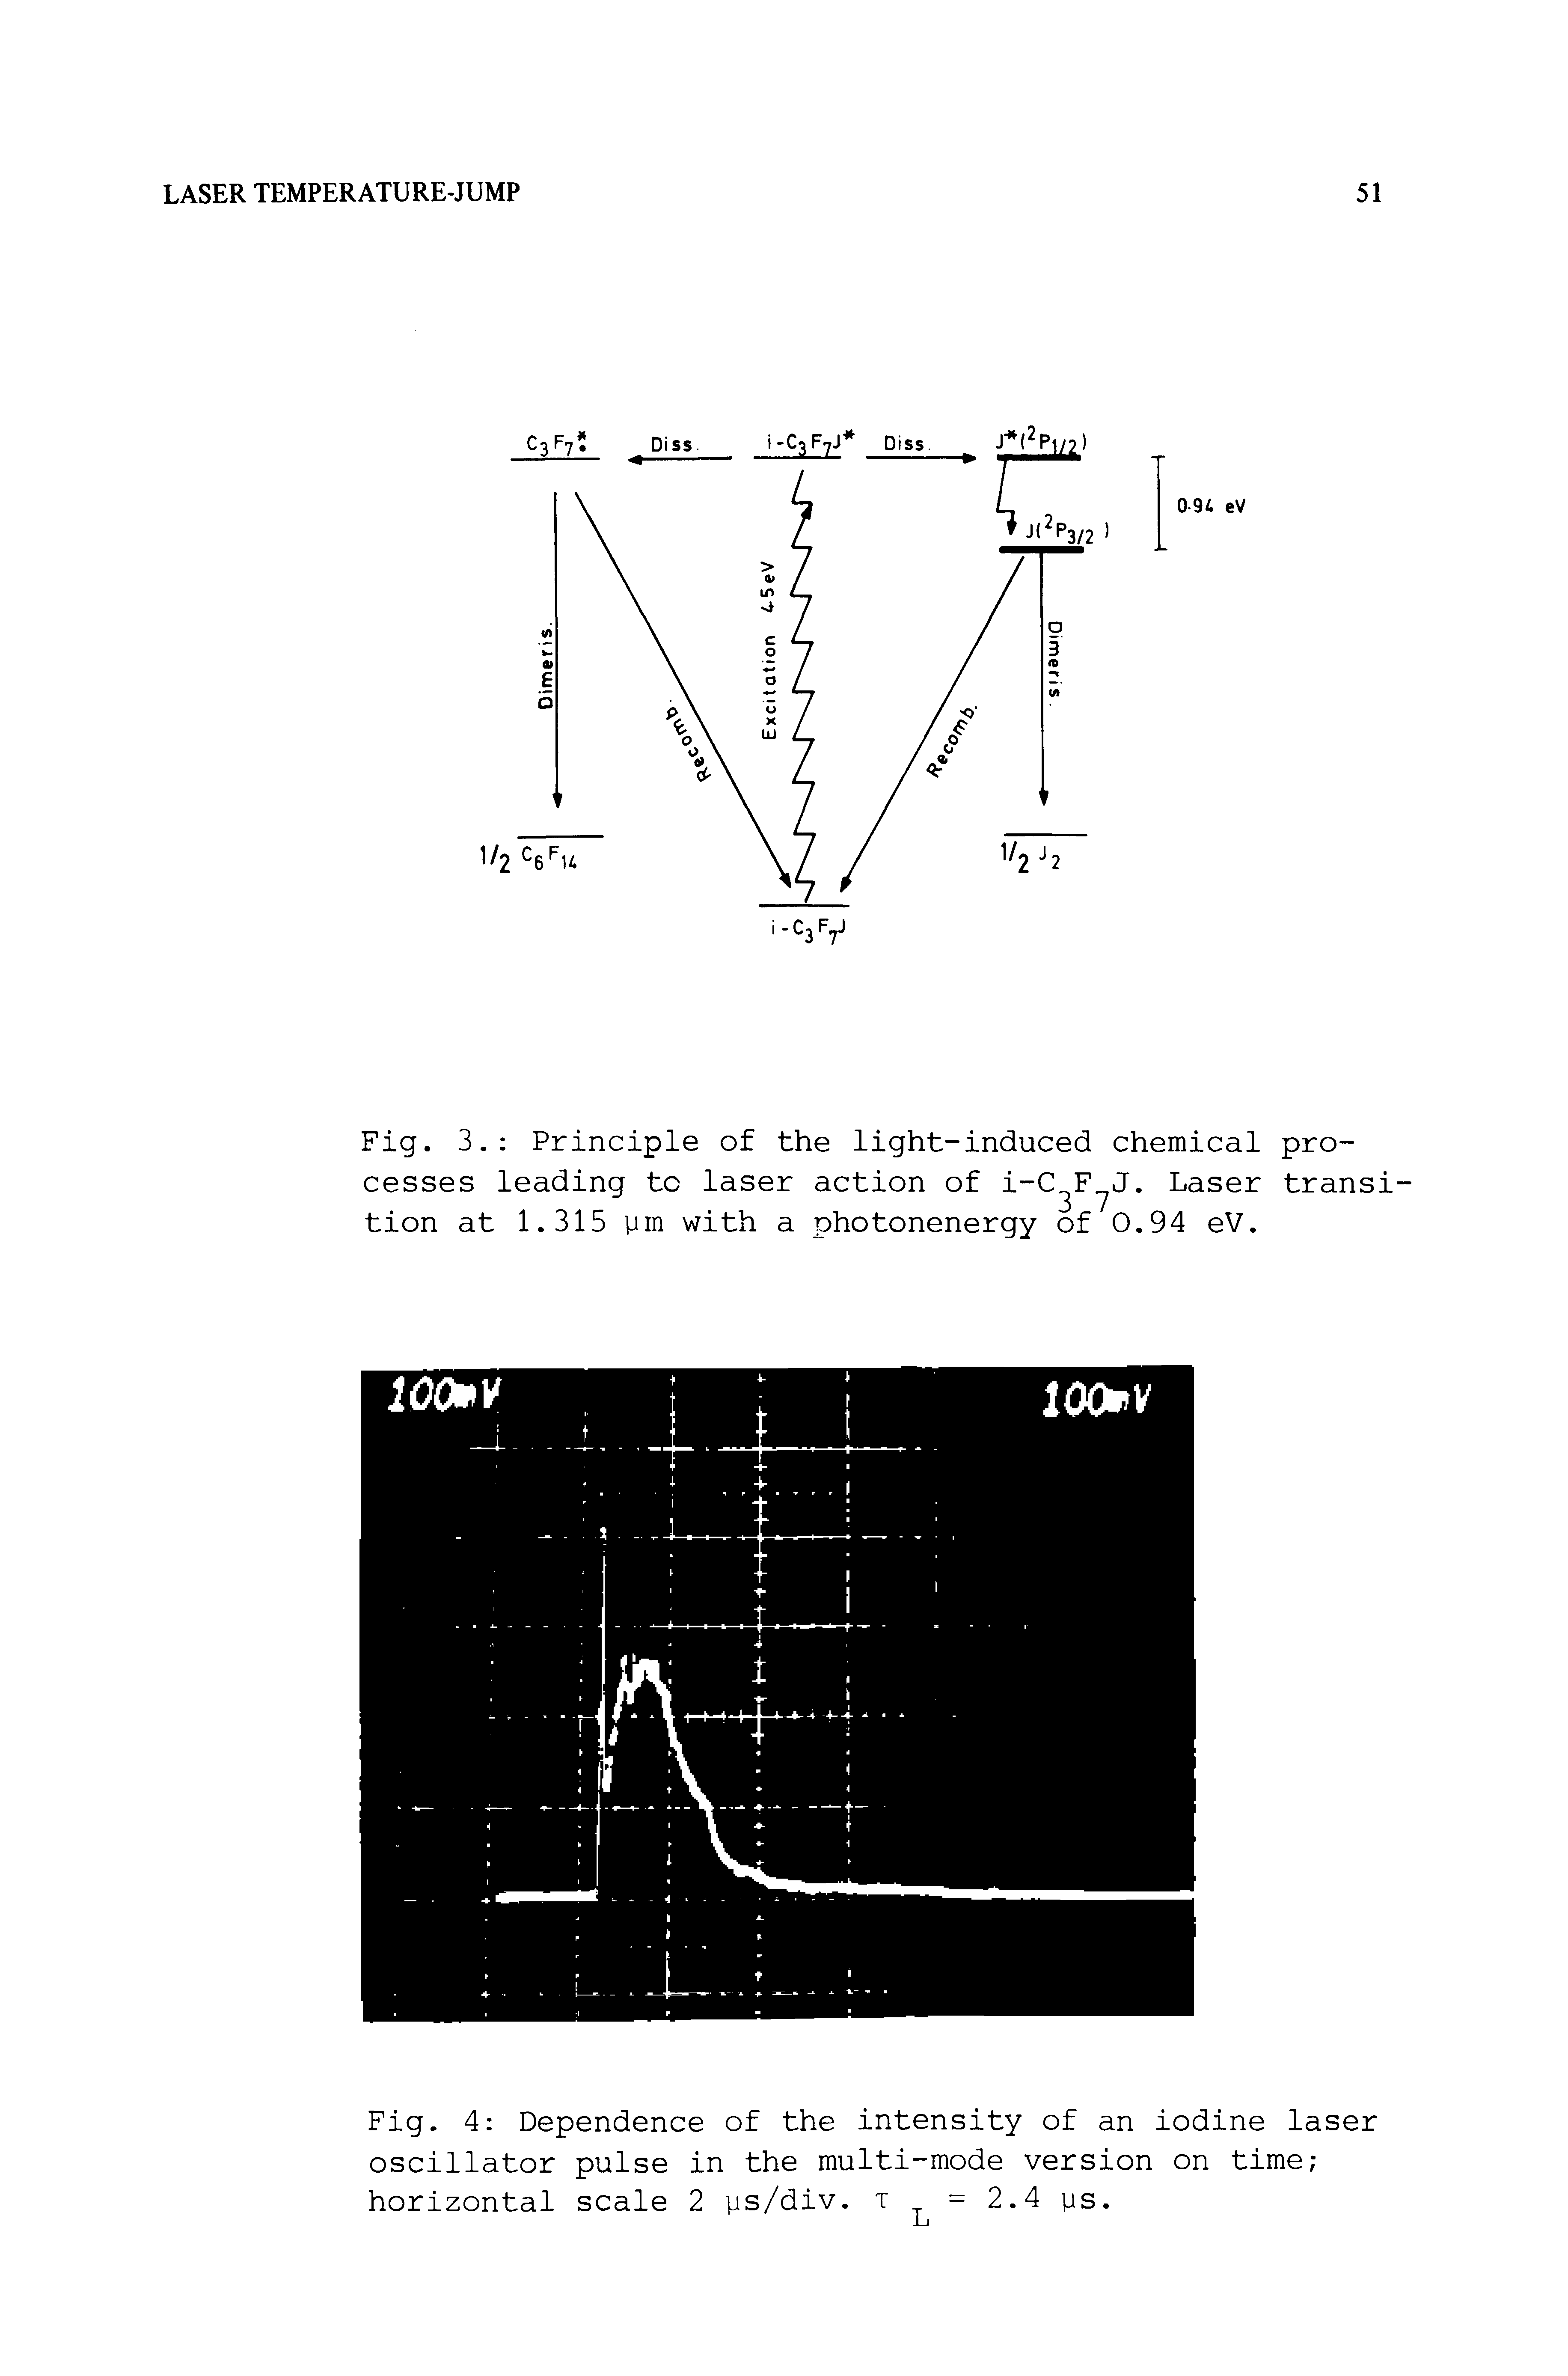 Fig. 4 Dependence of the intensity of an iodine laser oscillator pulse in the multi-mode version on time horizontal scale 2 ys/div. t =2.4 ys.